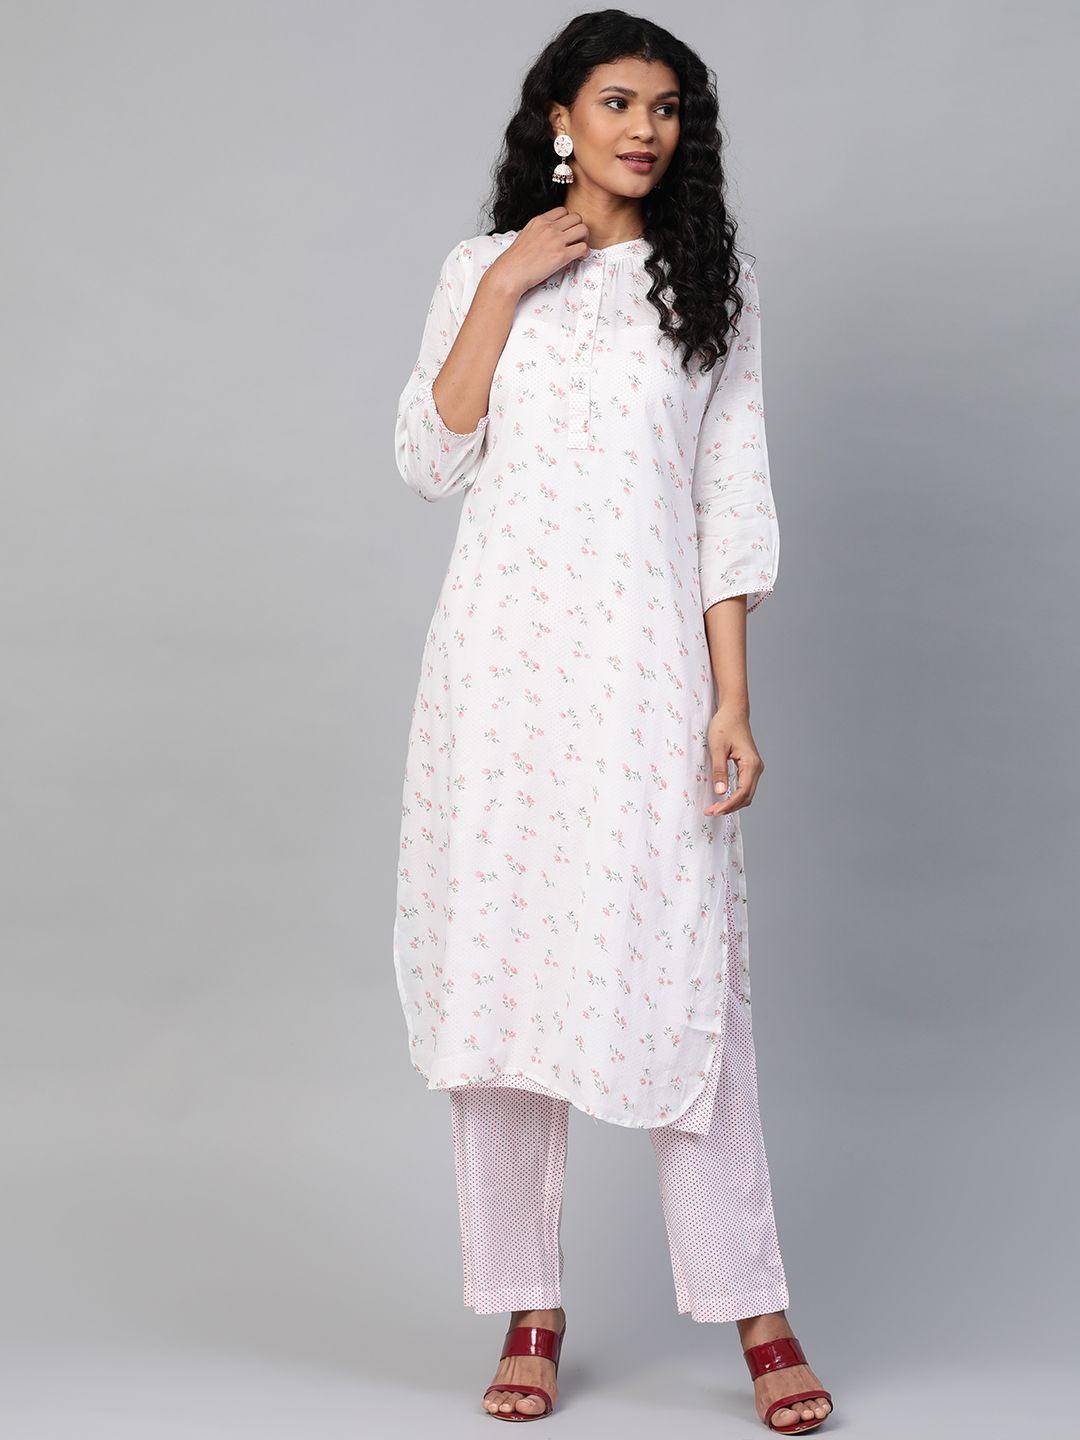 laado - pamper yourself women white & red floral printed kurta with trousers